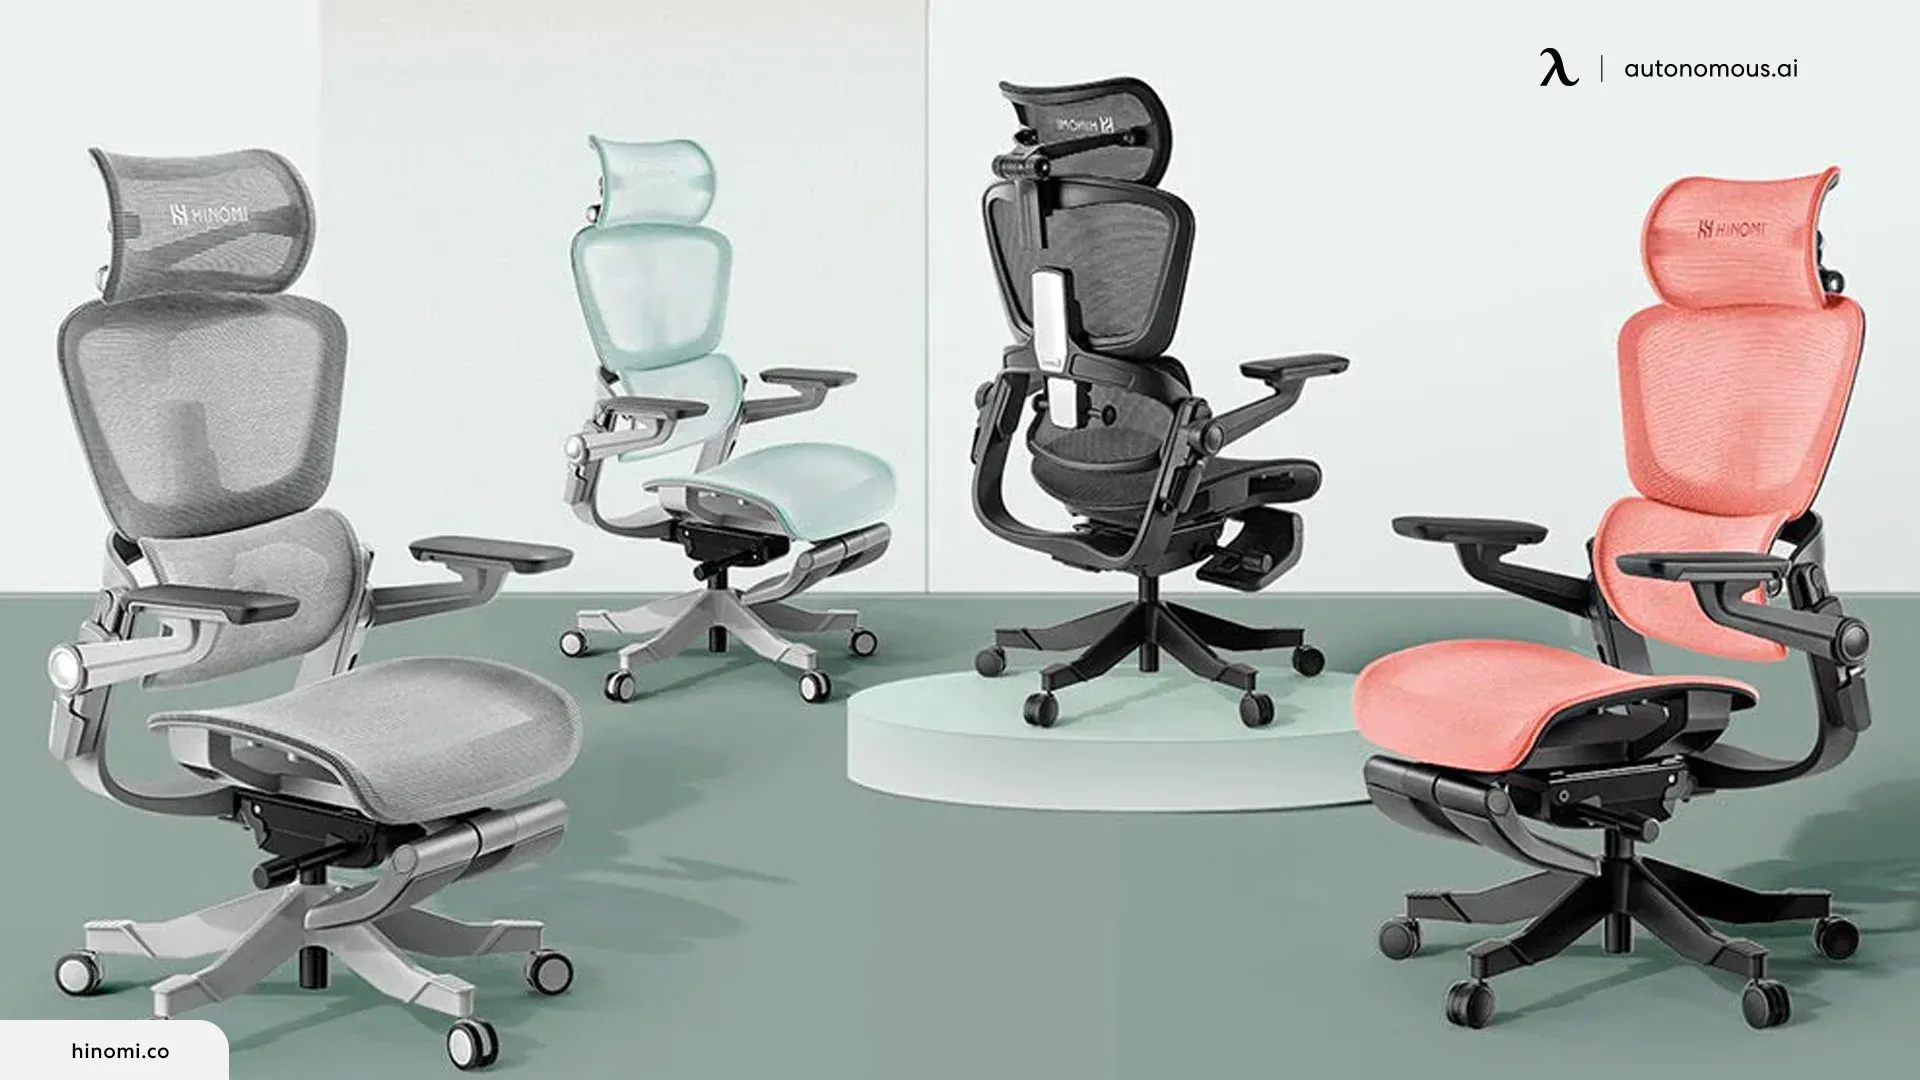 Hinomi Chairs Review 2023 | Double Lumbar Support for Comfort